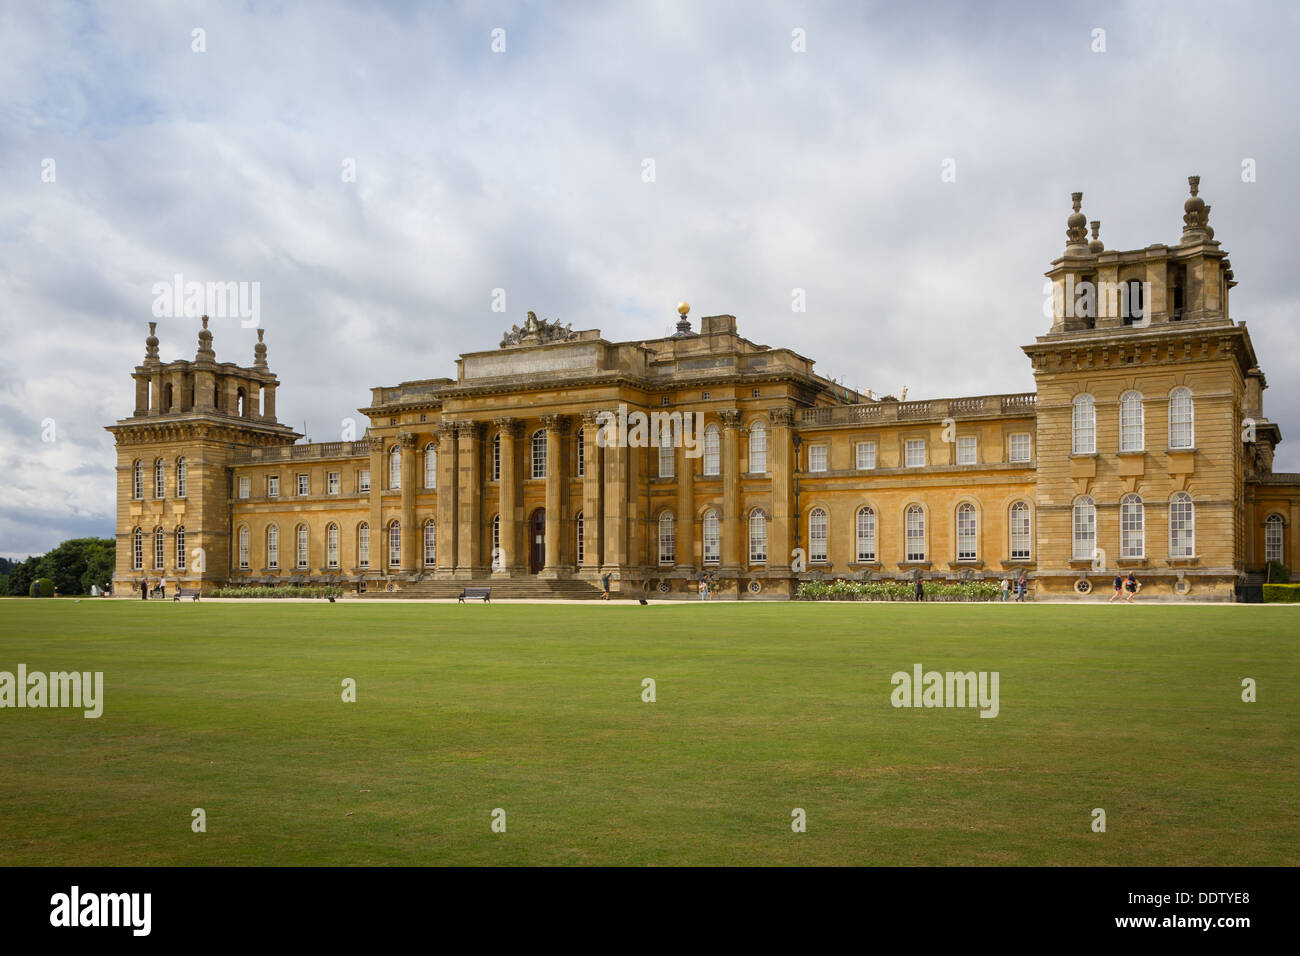 The Front Facade of Blenheim Palace in Woodstock, Oxfordshire, England Stock Photo